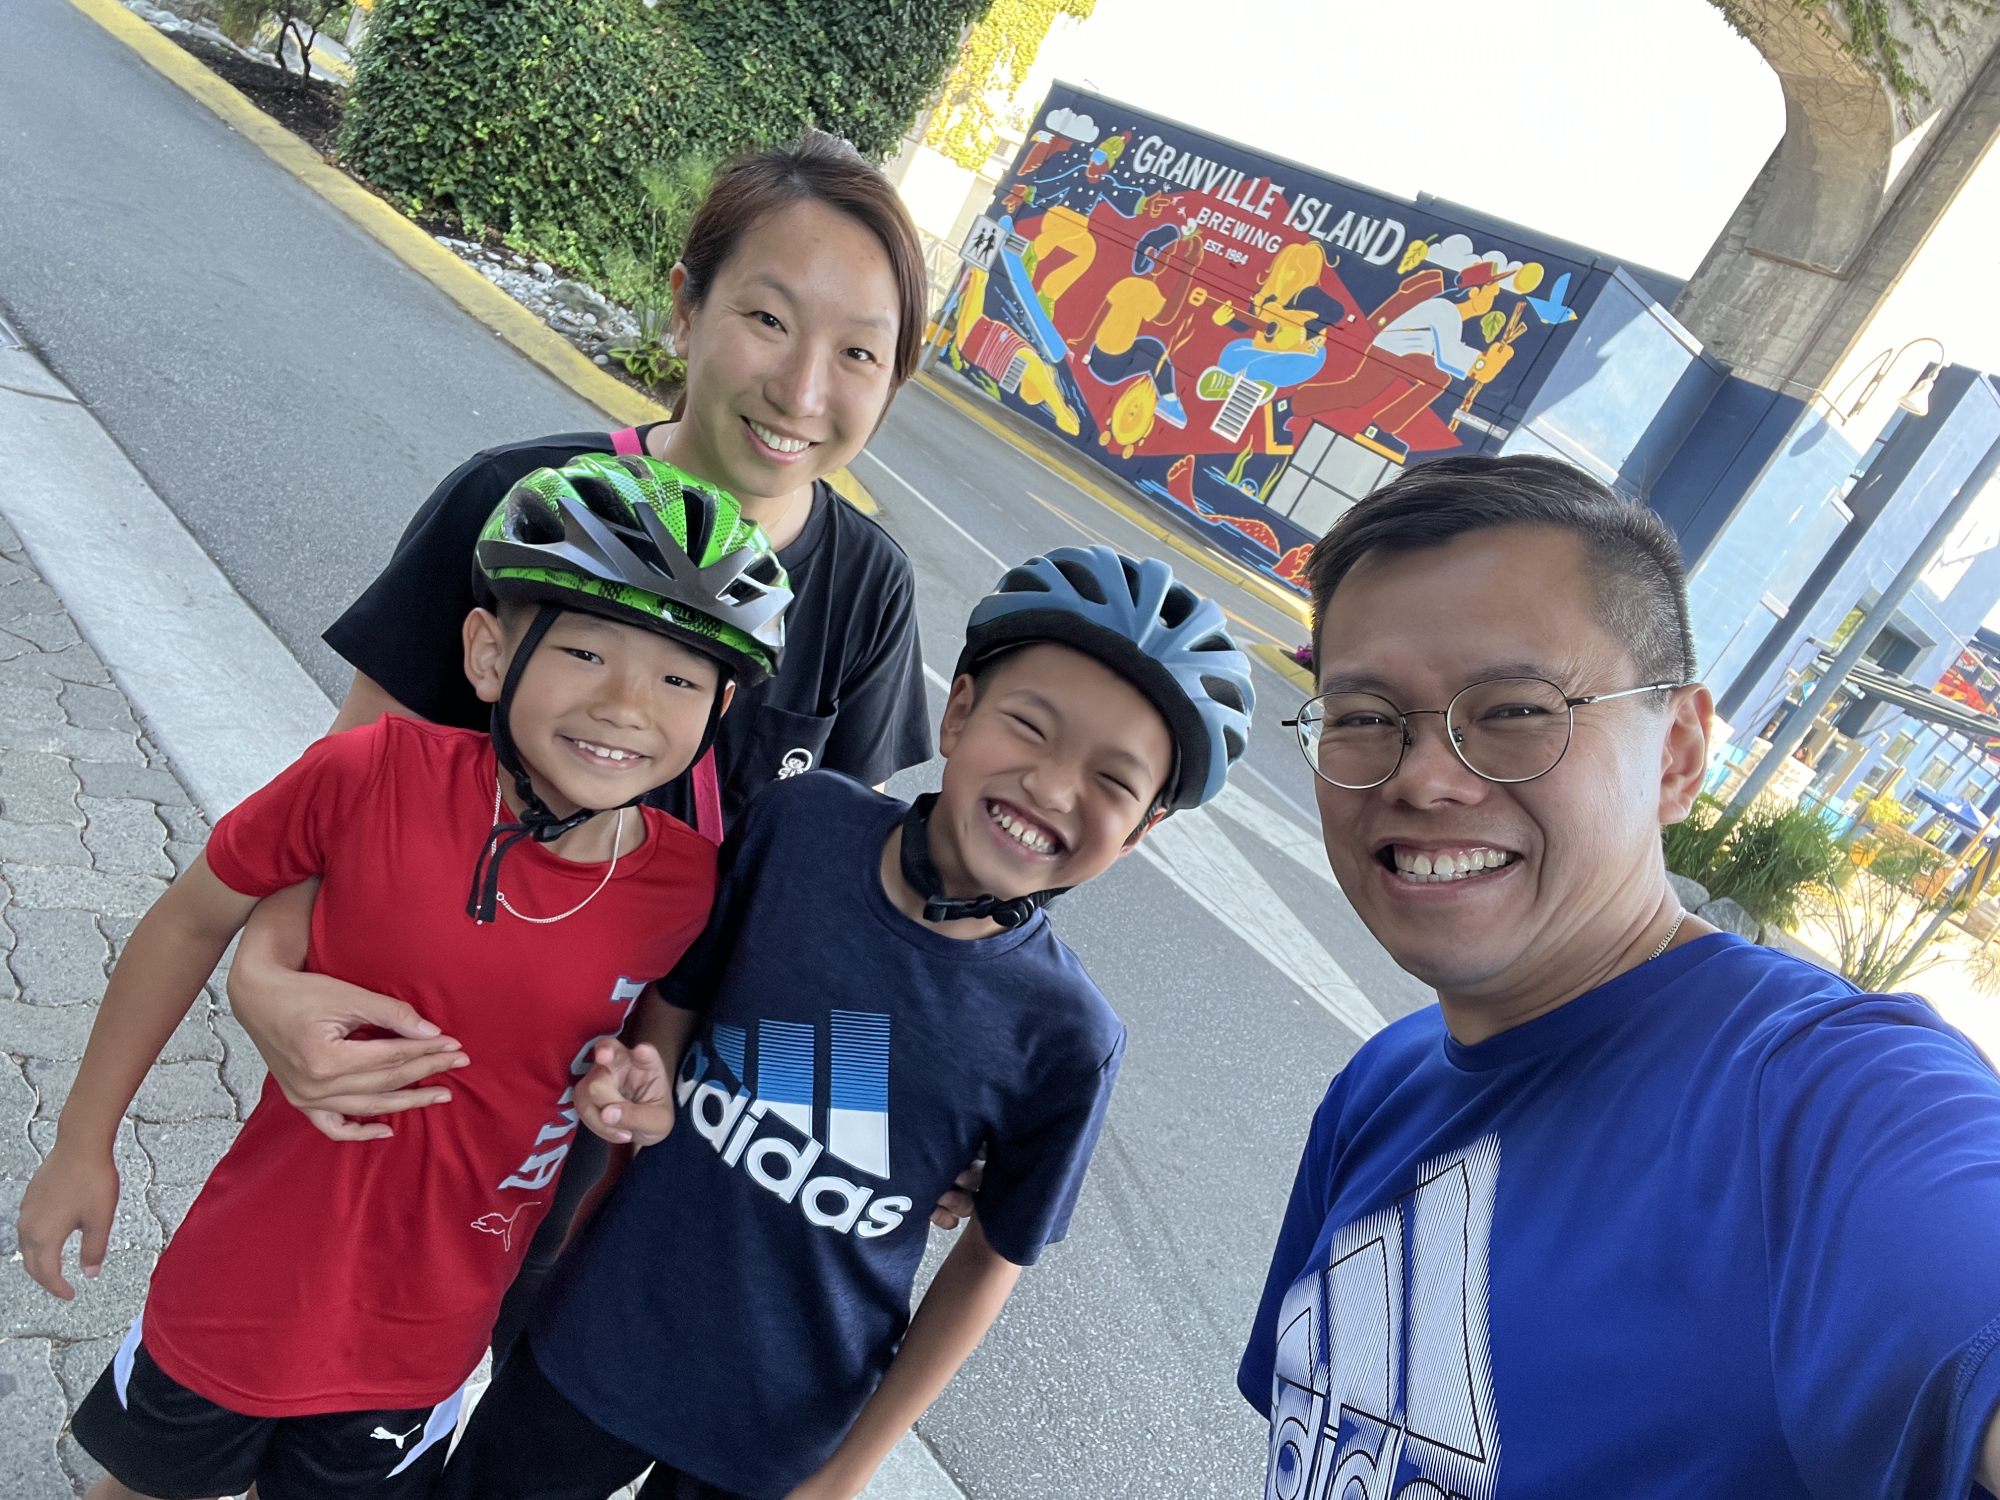 Paul Lau, a former secondary schoolteacher in Hong Kong, moved his family to Vancouver this year for his children’s education. Photo: Paul Lau